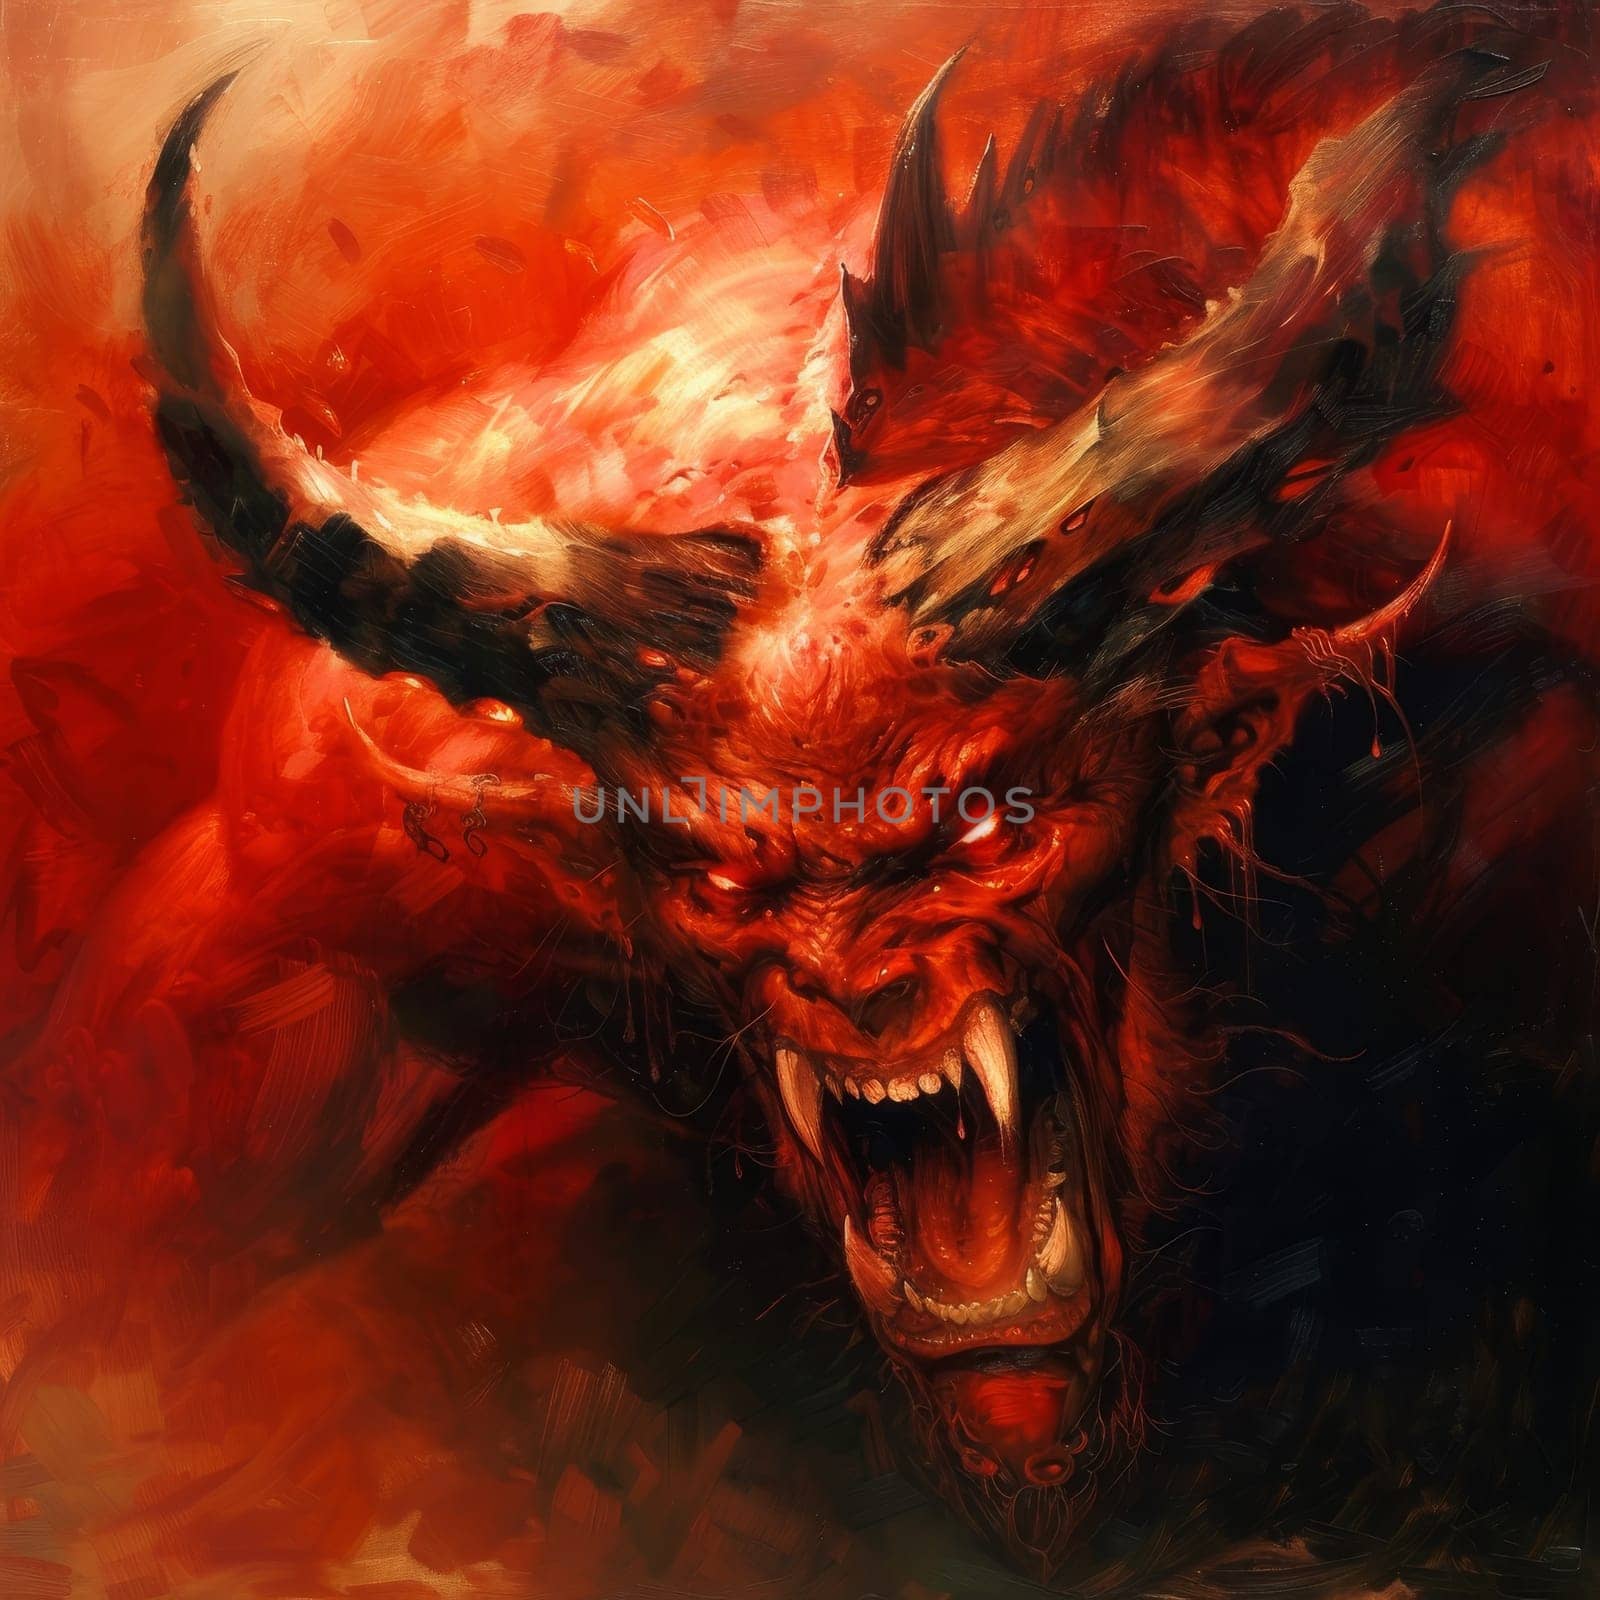 Artistic depiction of a fierce red demon with glaring eyes and large horns